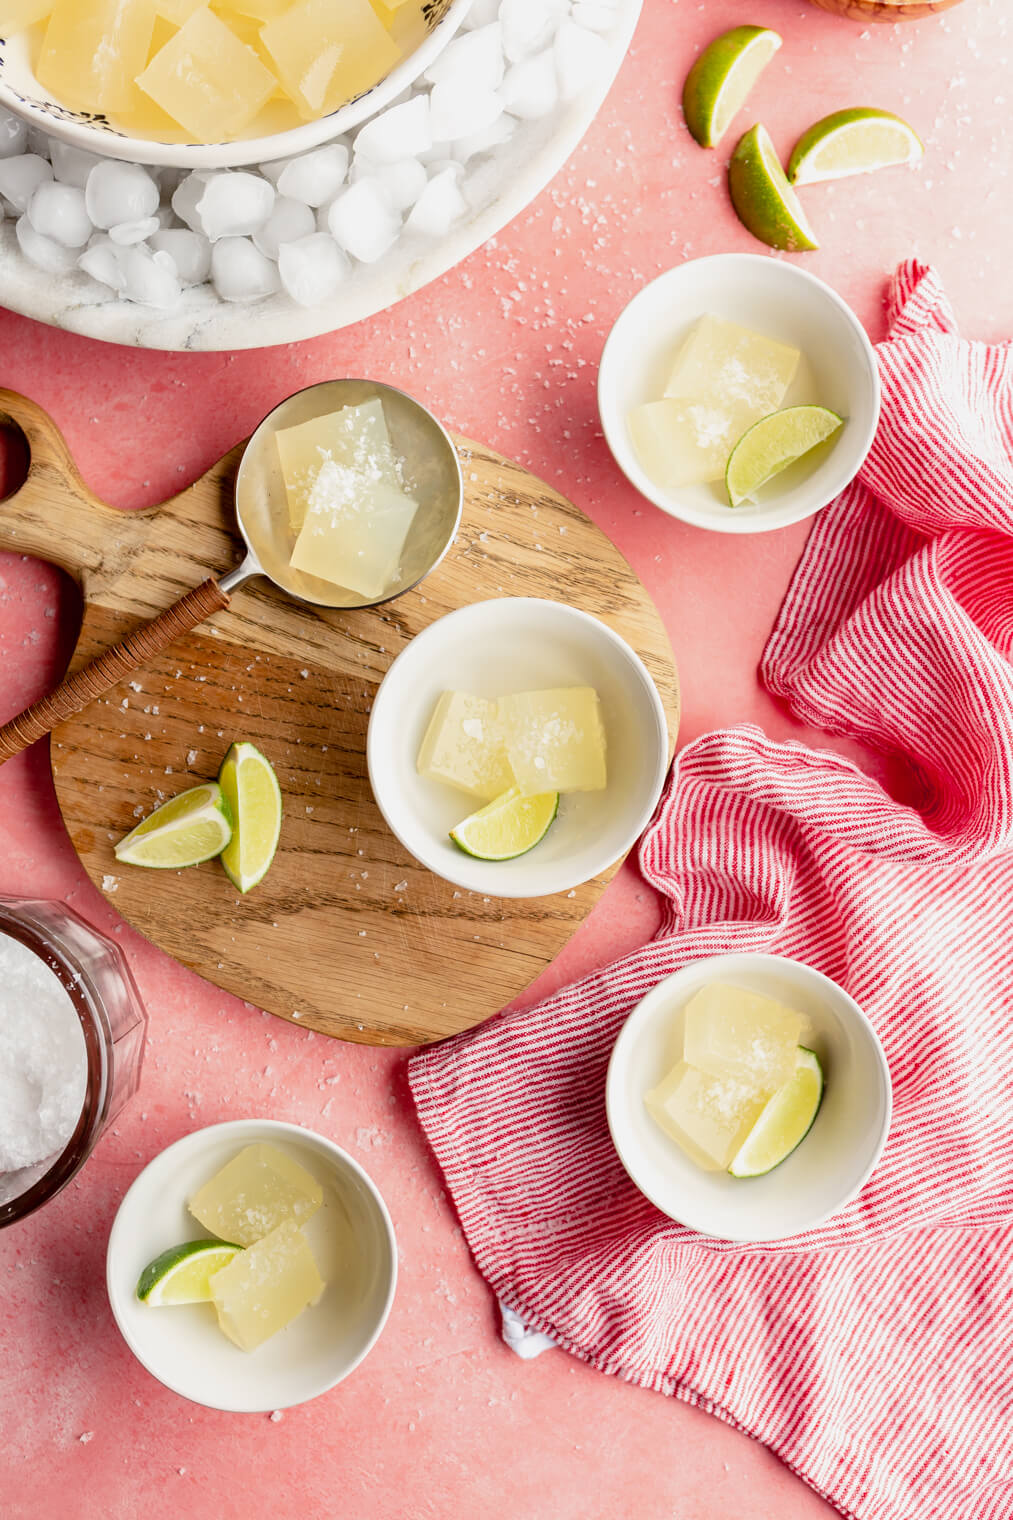 Top down view of margarita jello shots in small white bowls on a blush colored table draped with a red and white striped towel.